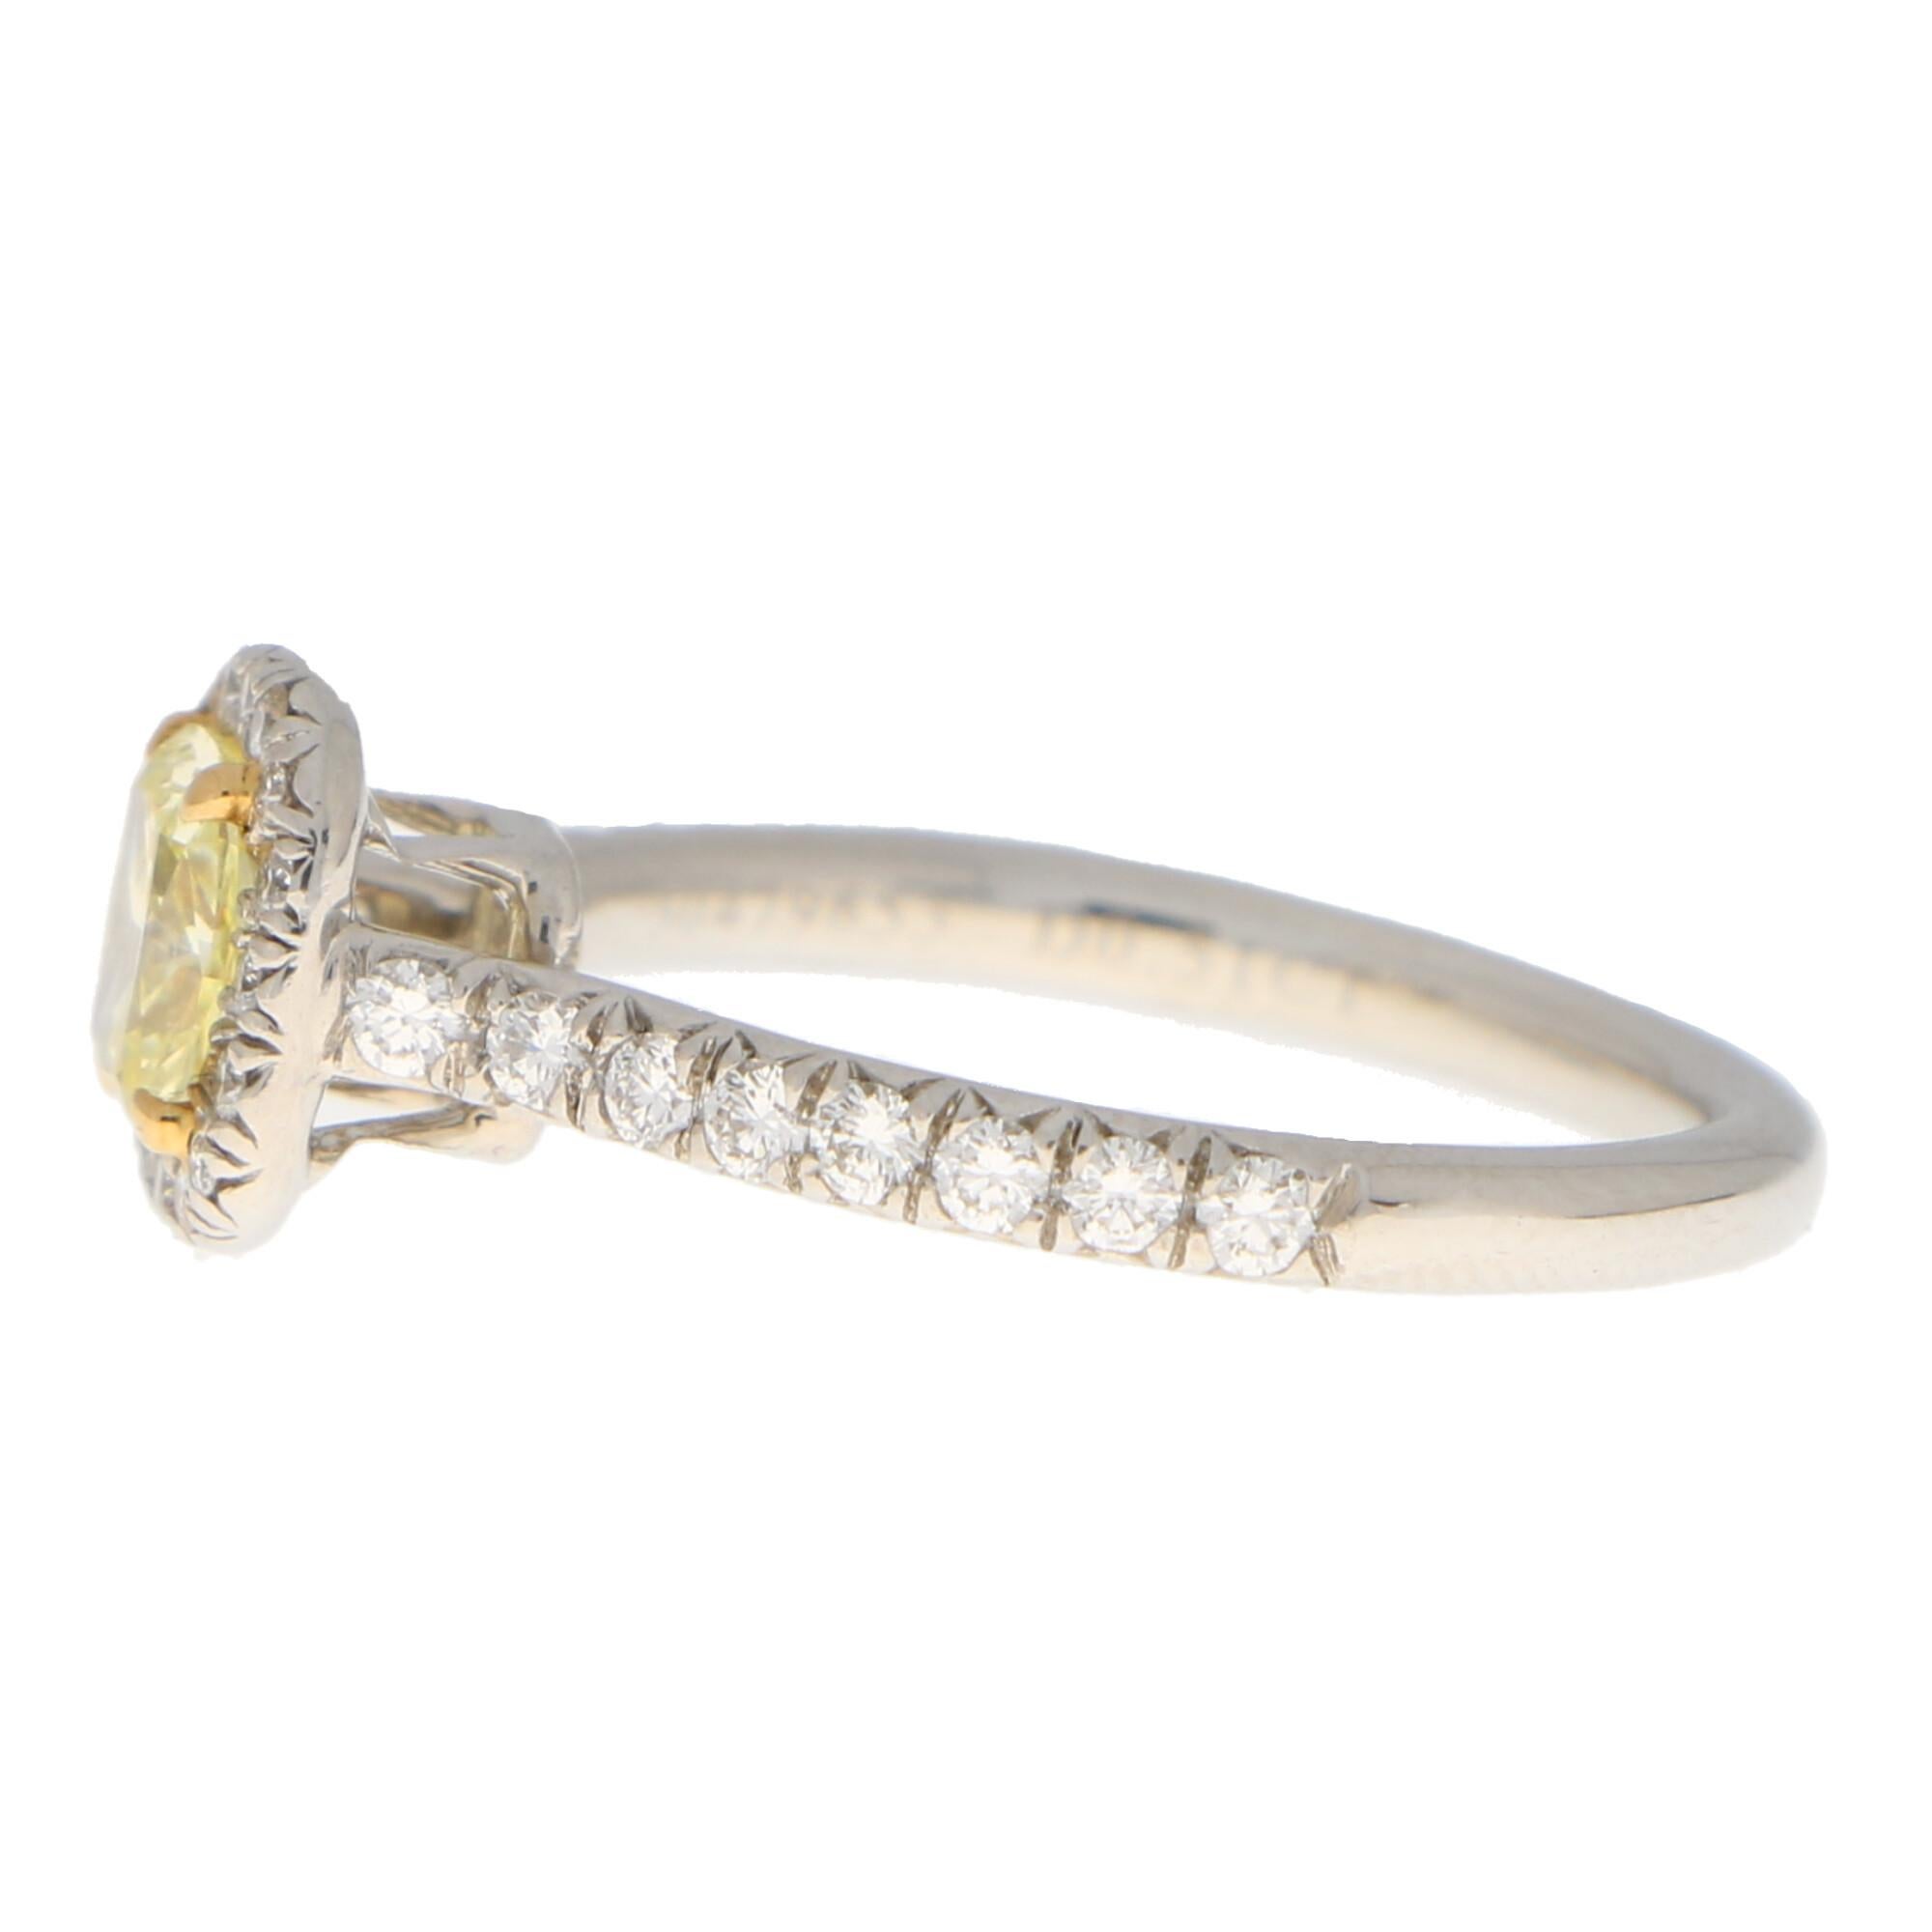 Modern Tiffany & Co 'Soleste' Fancy Yellow Diamond Engagement Ring in Platinum and Gold